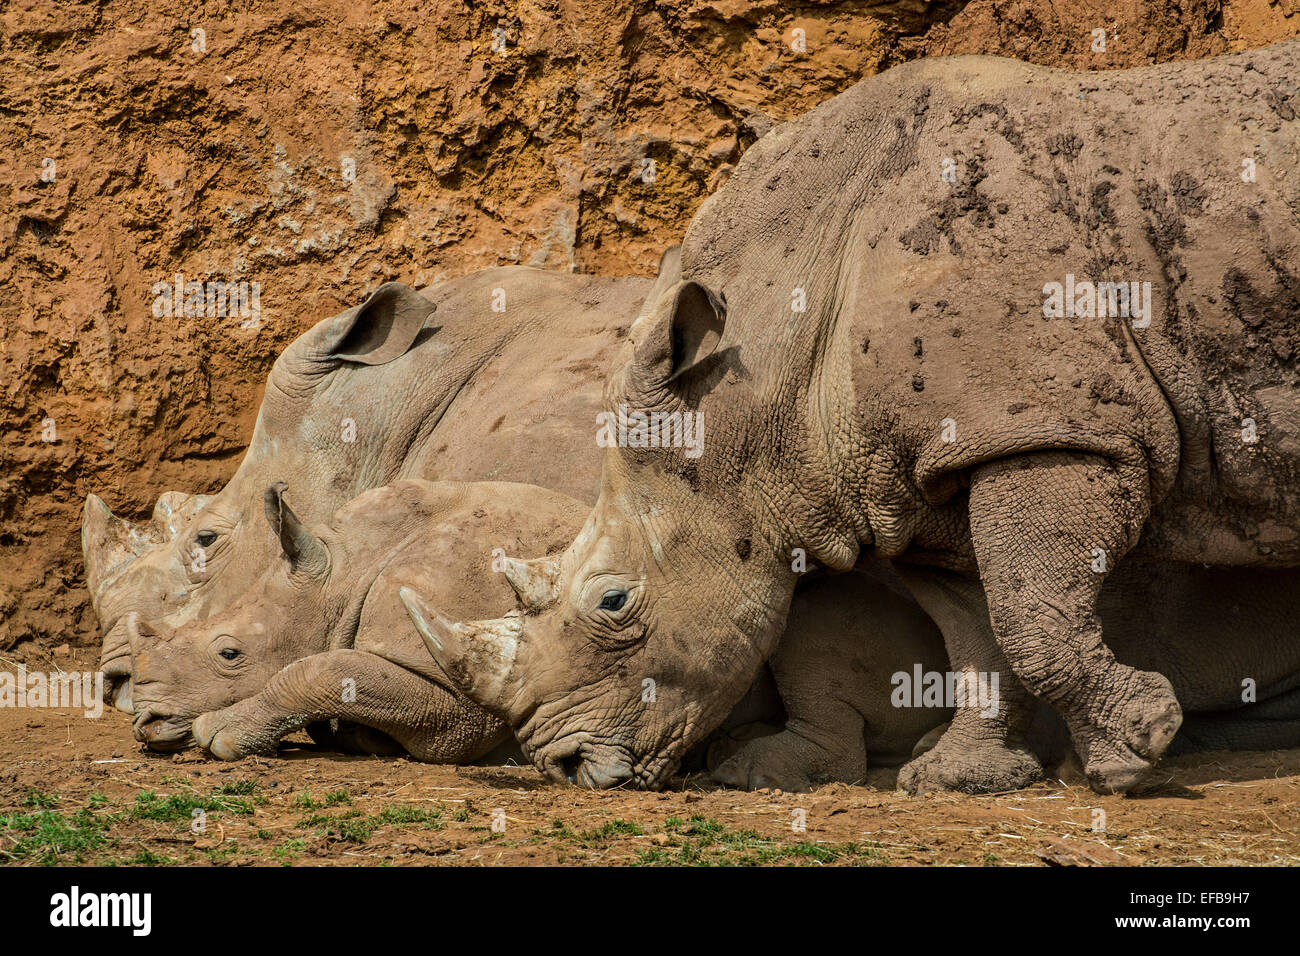 White rhino / Square-lipped rhinoceros (Ceratotherium simum) family group showing male, female and calf resting Stock Photo